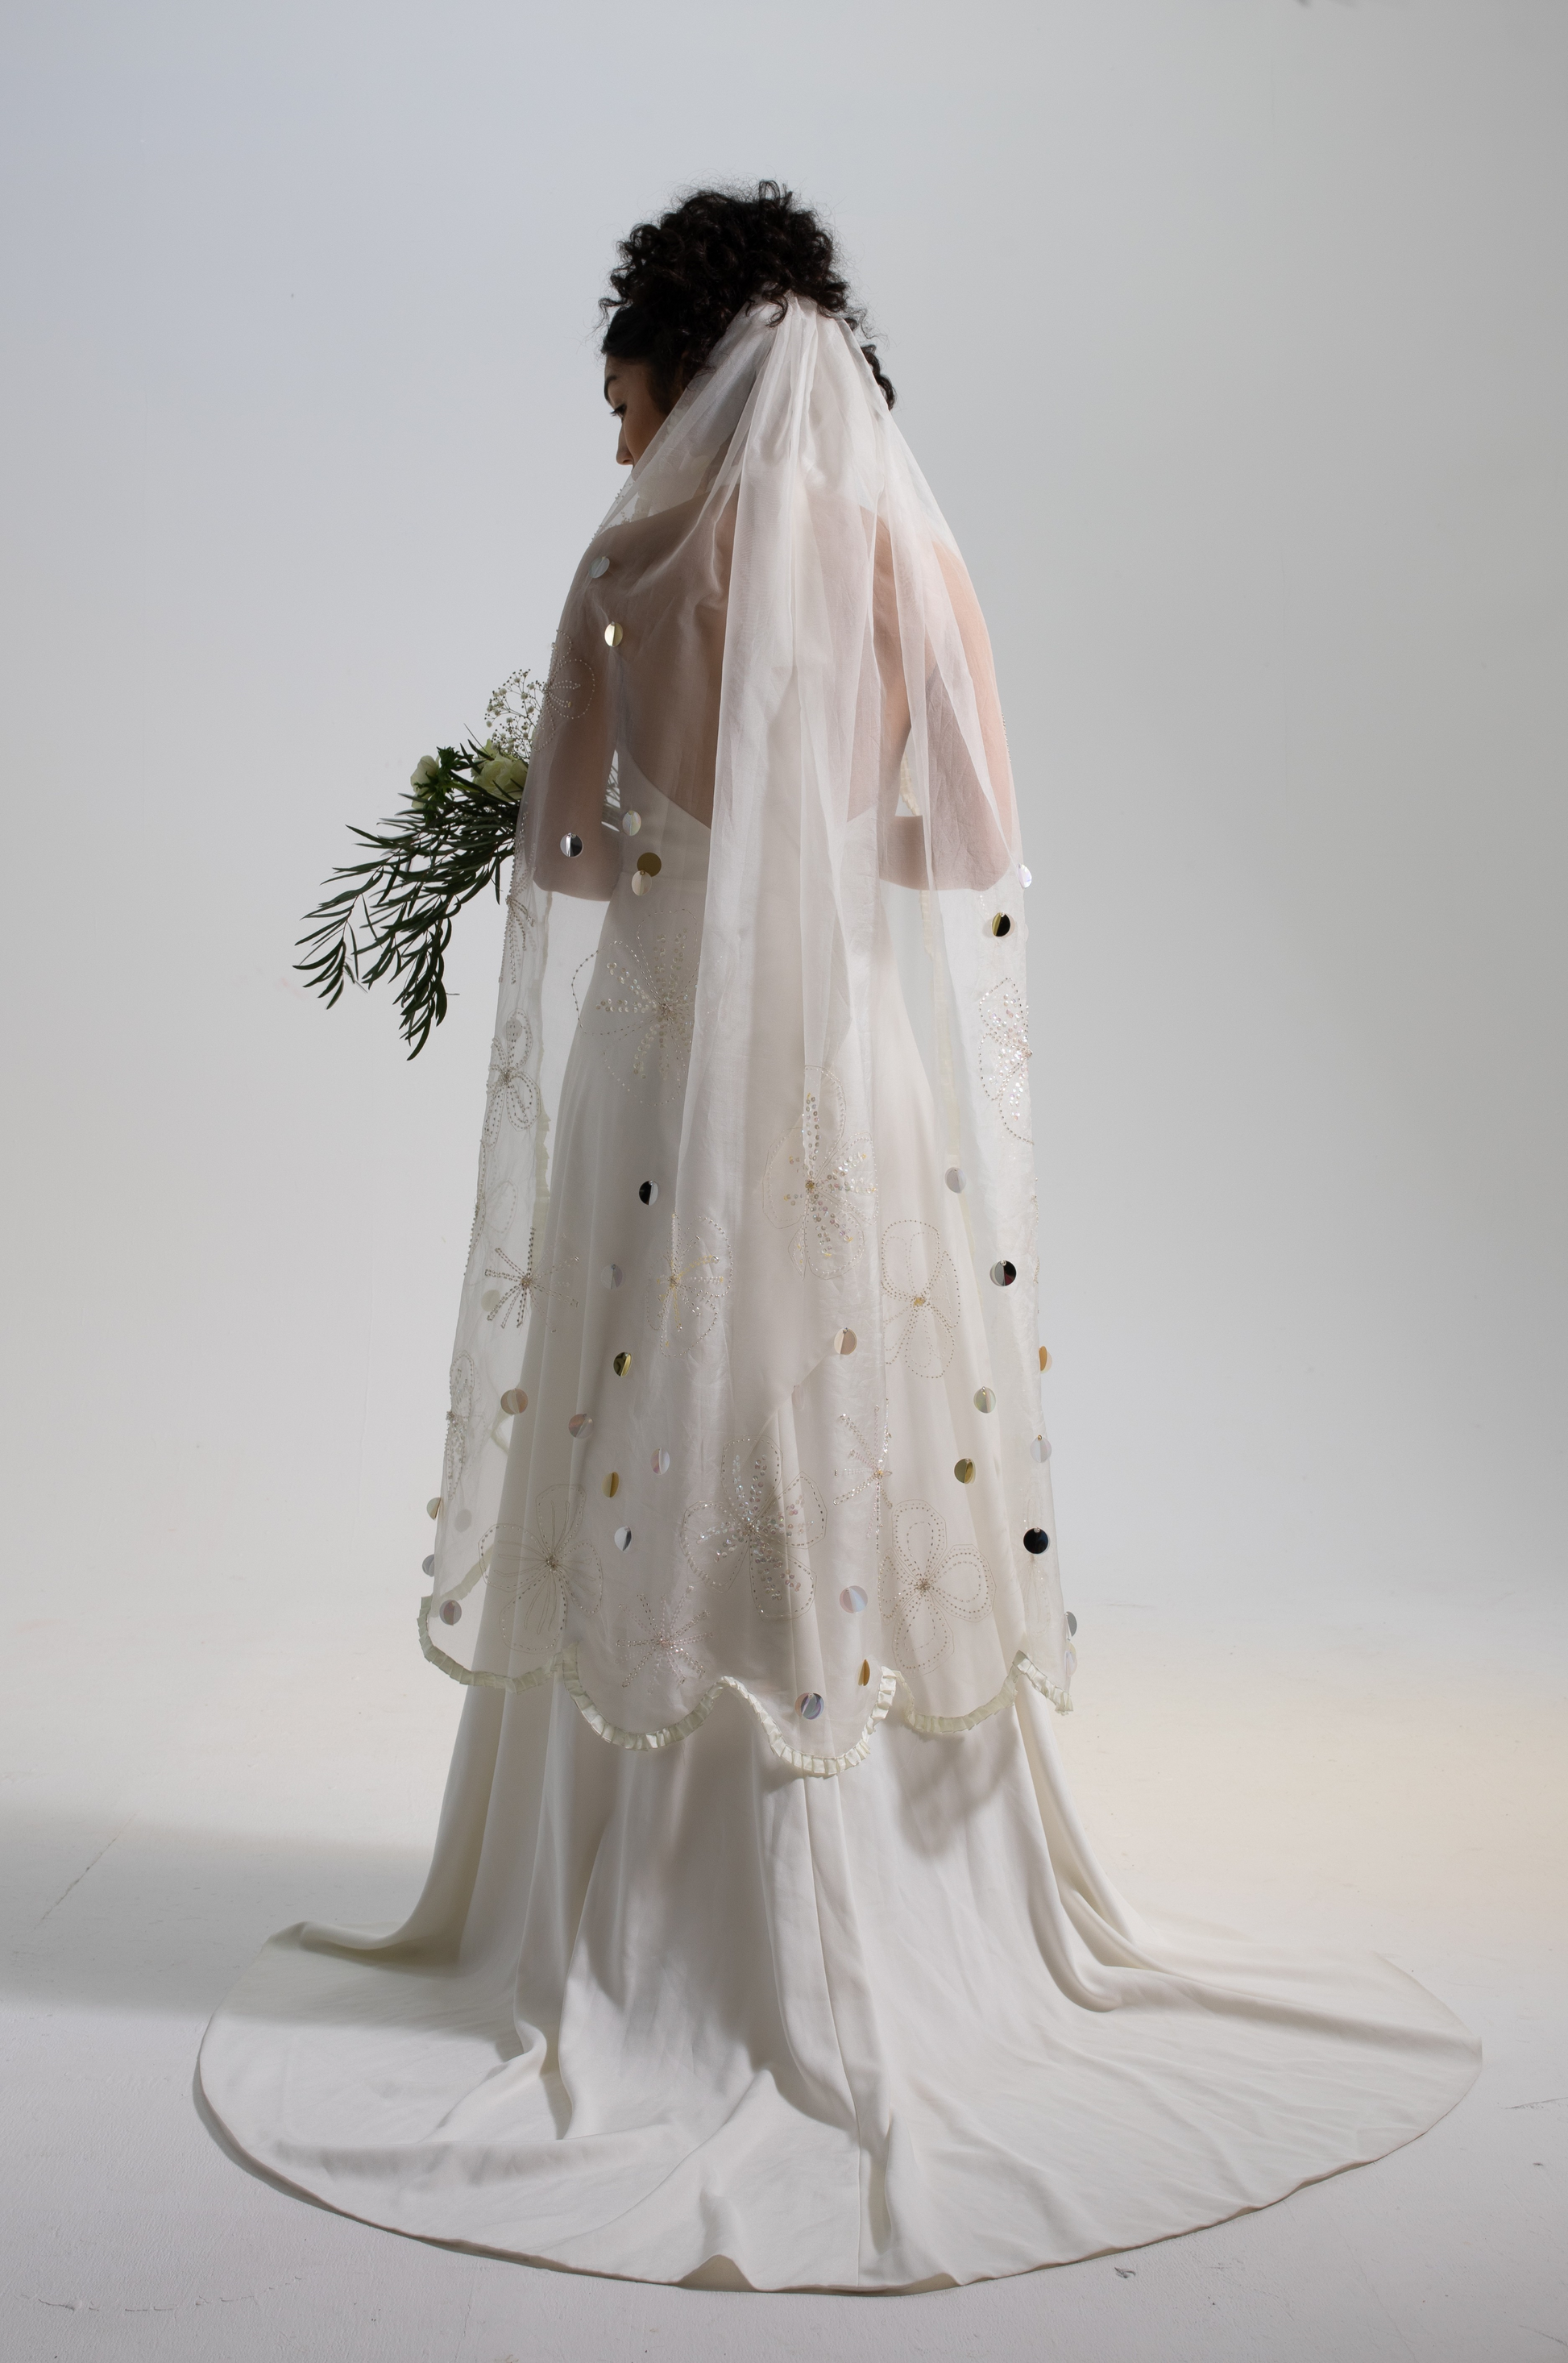 Silk organza embroidered veil, a highly decorative hand beaded floral embroidered veil from a collection of hand embellished, luxury bridal accessories, bridal headwear and veils.